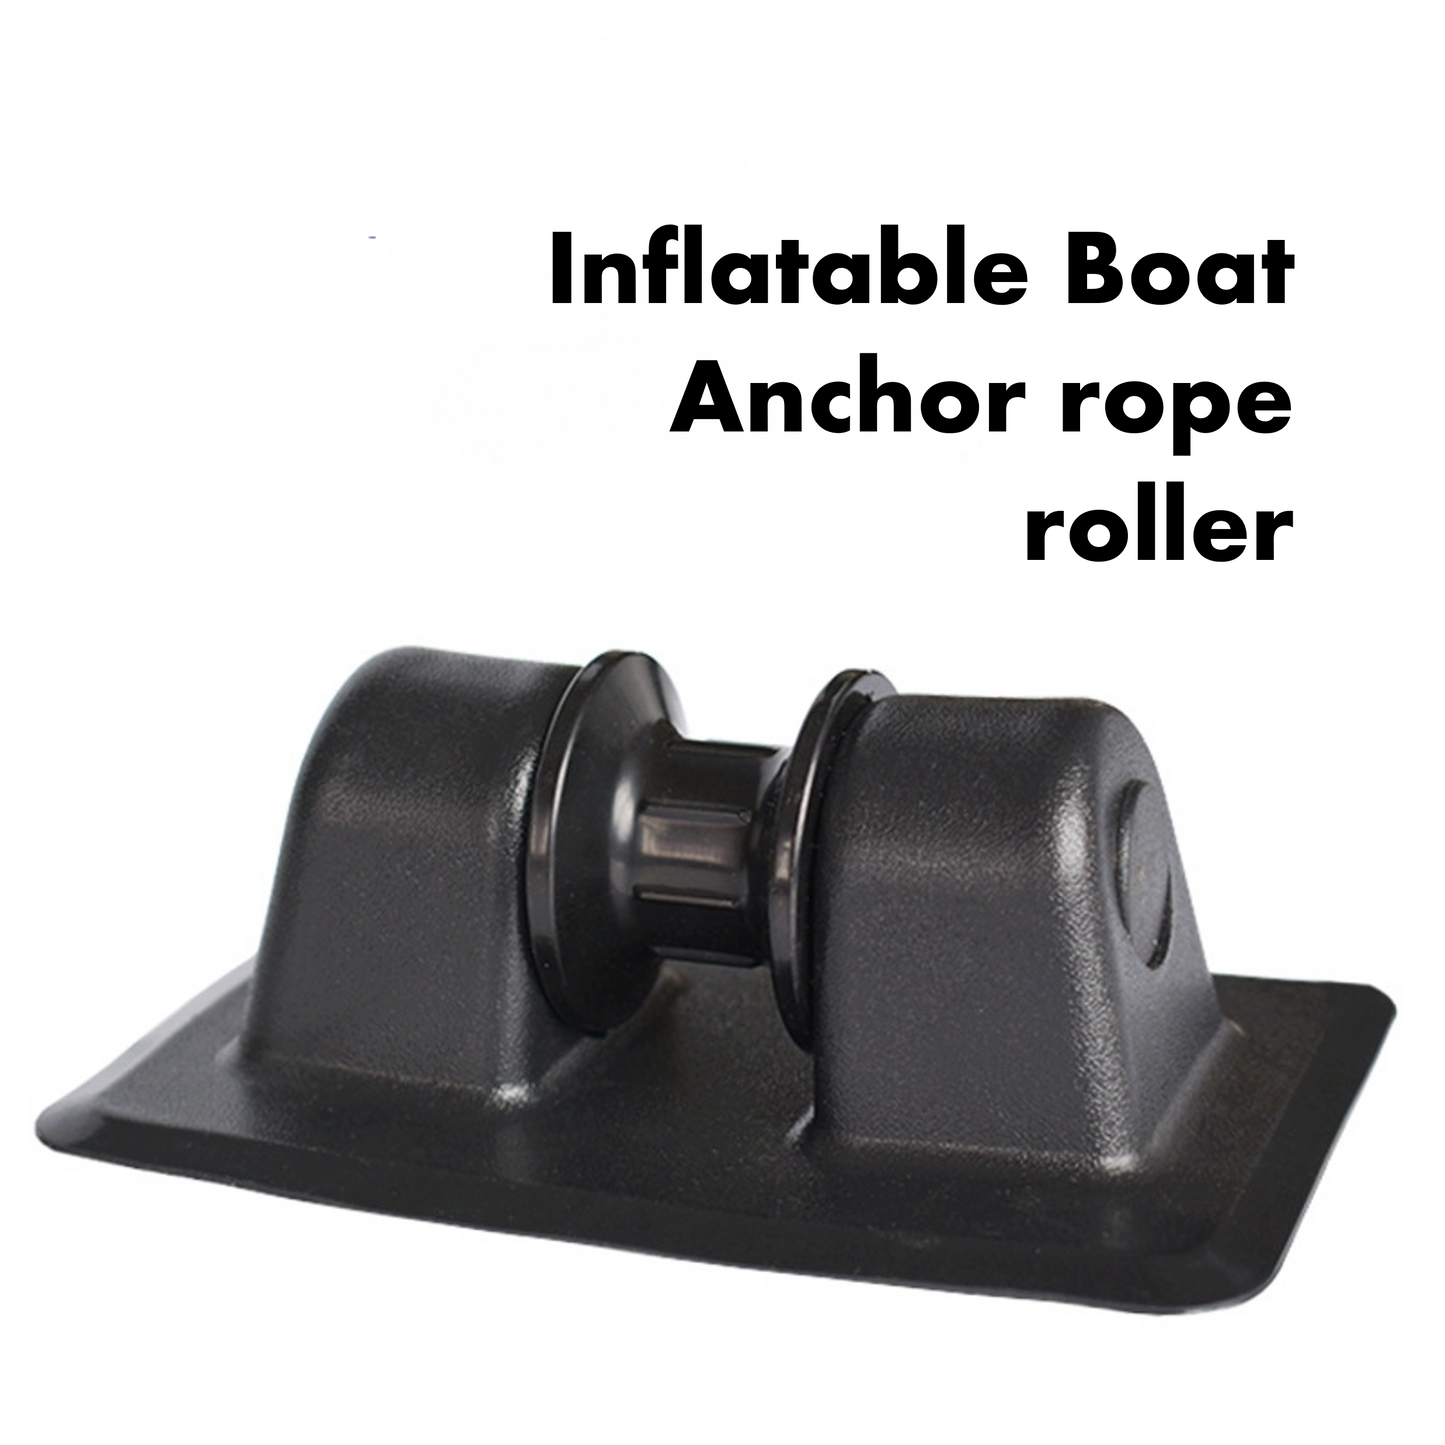 Inflatable Boat Anchor rope roller